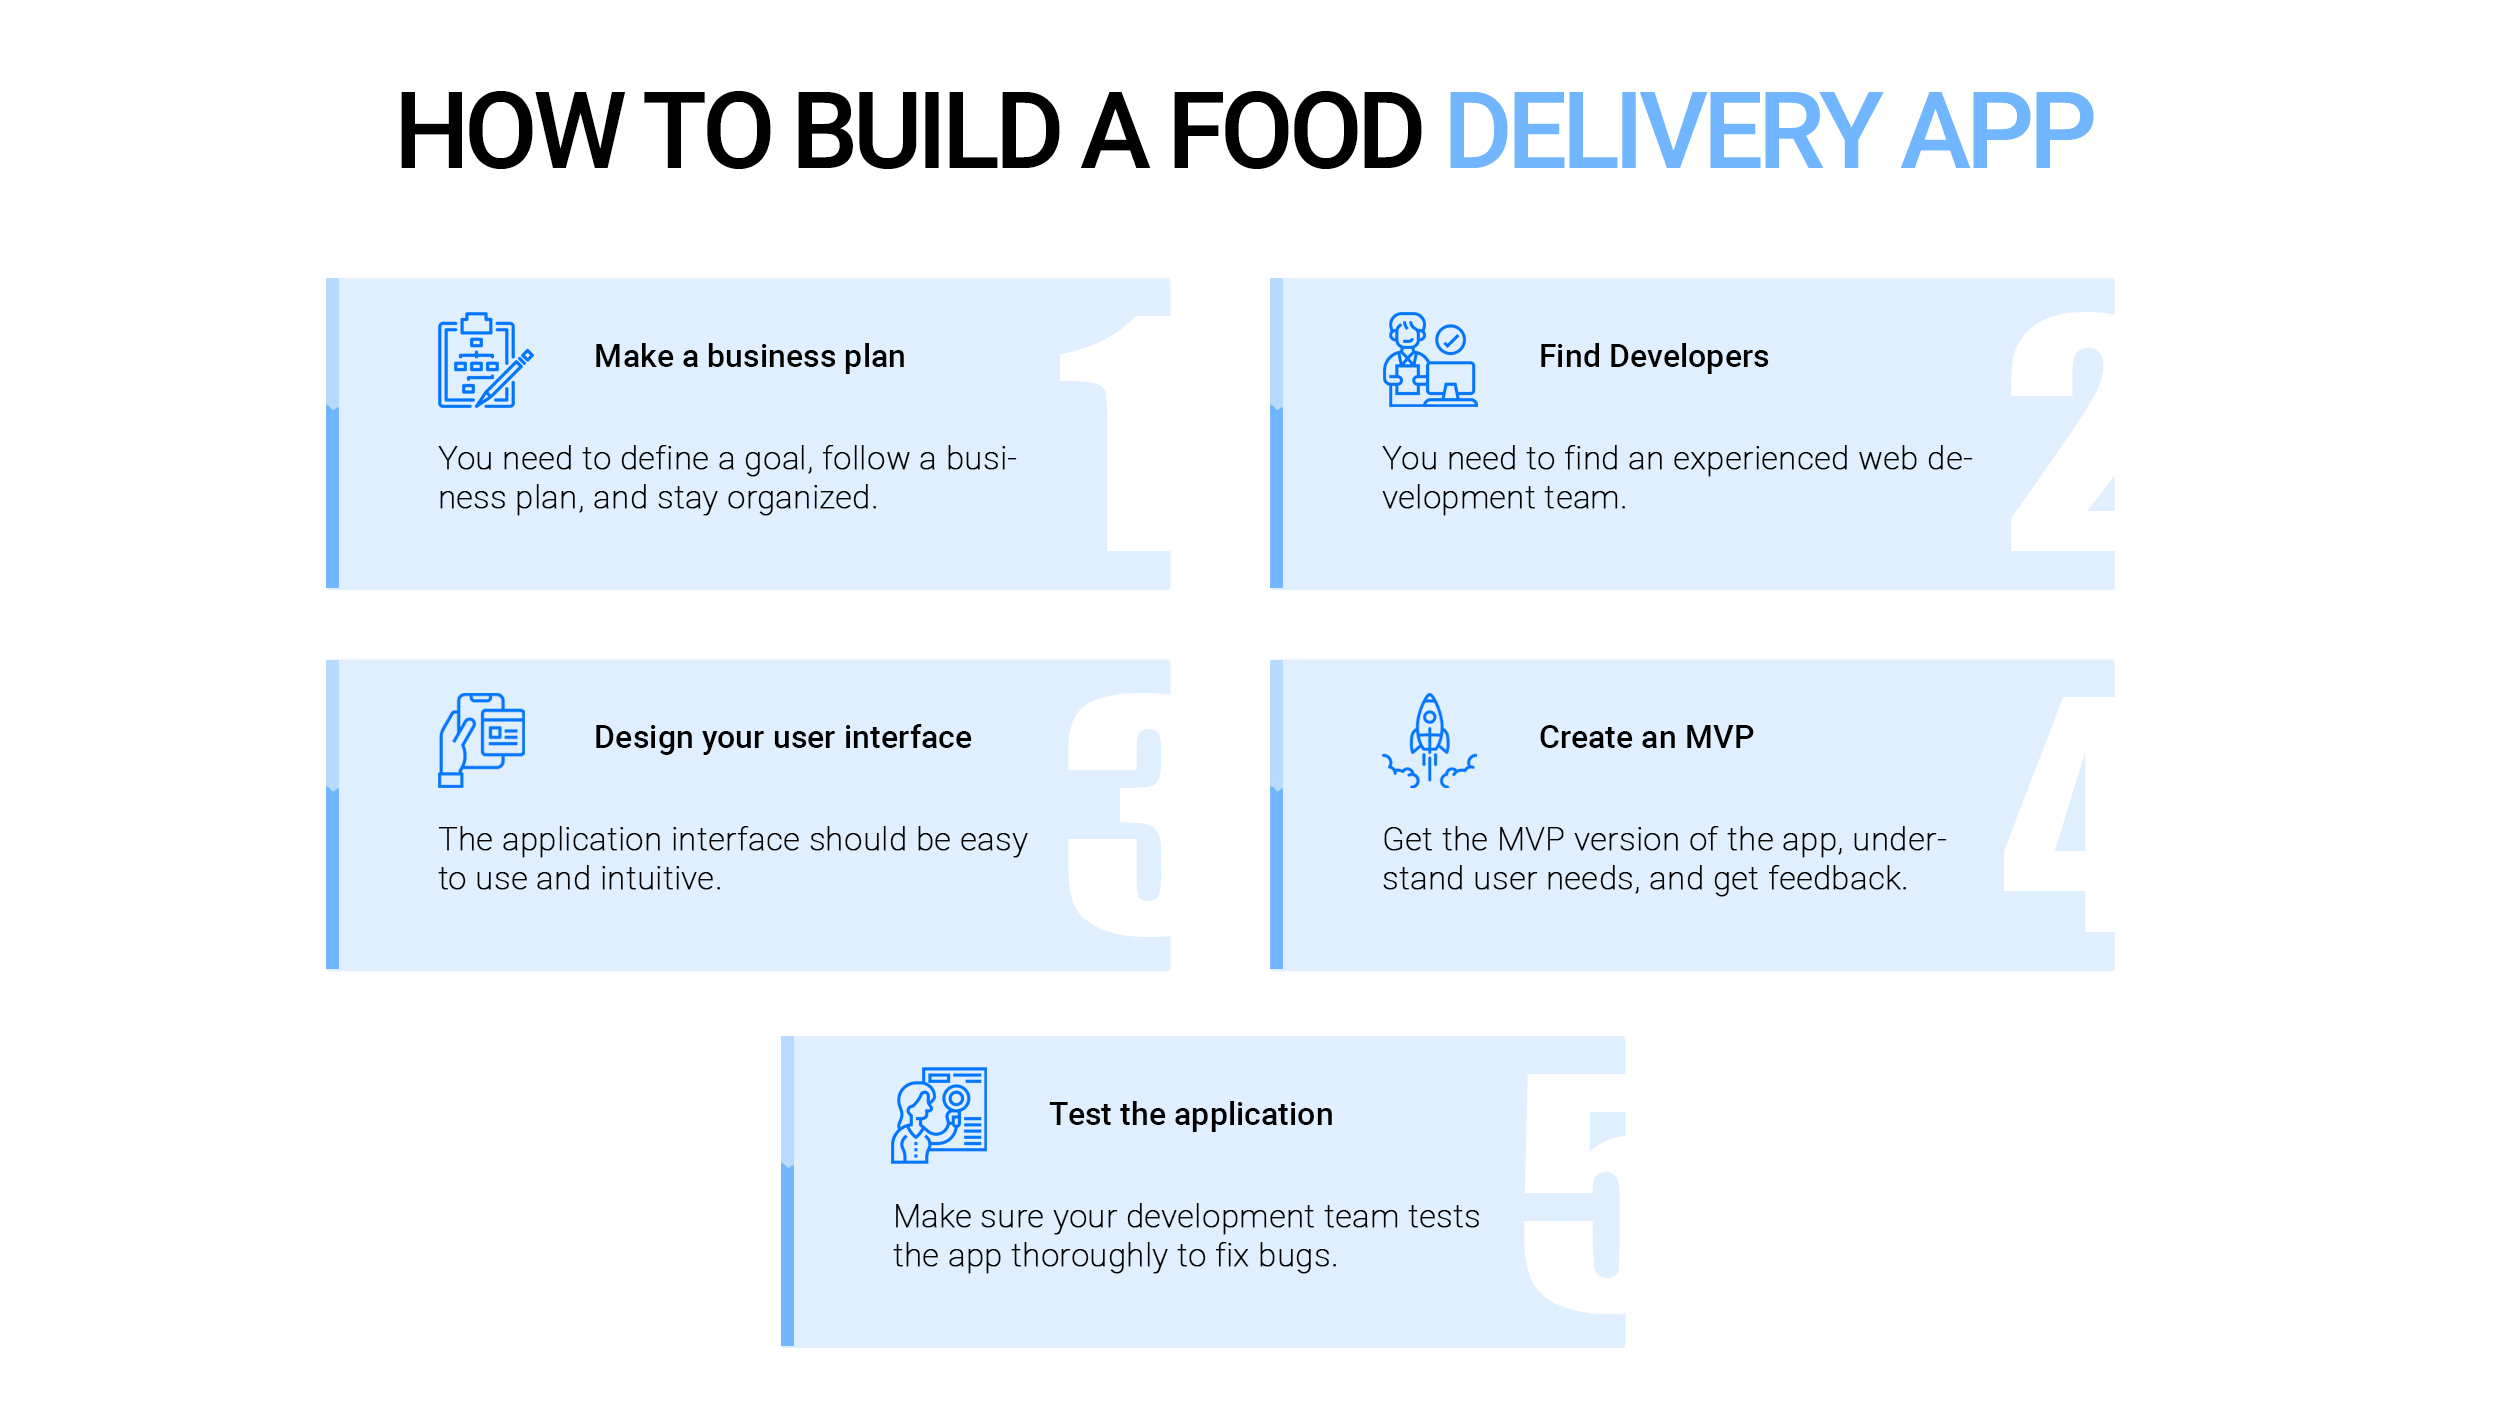 How to build a food delivery app